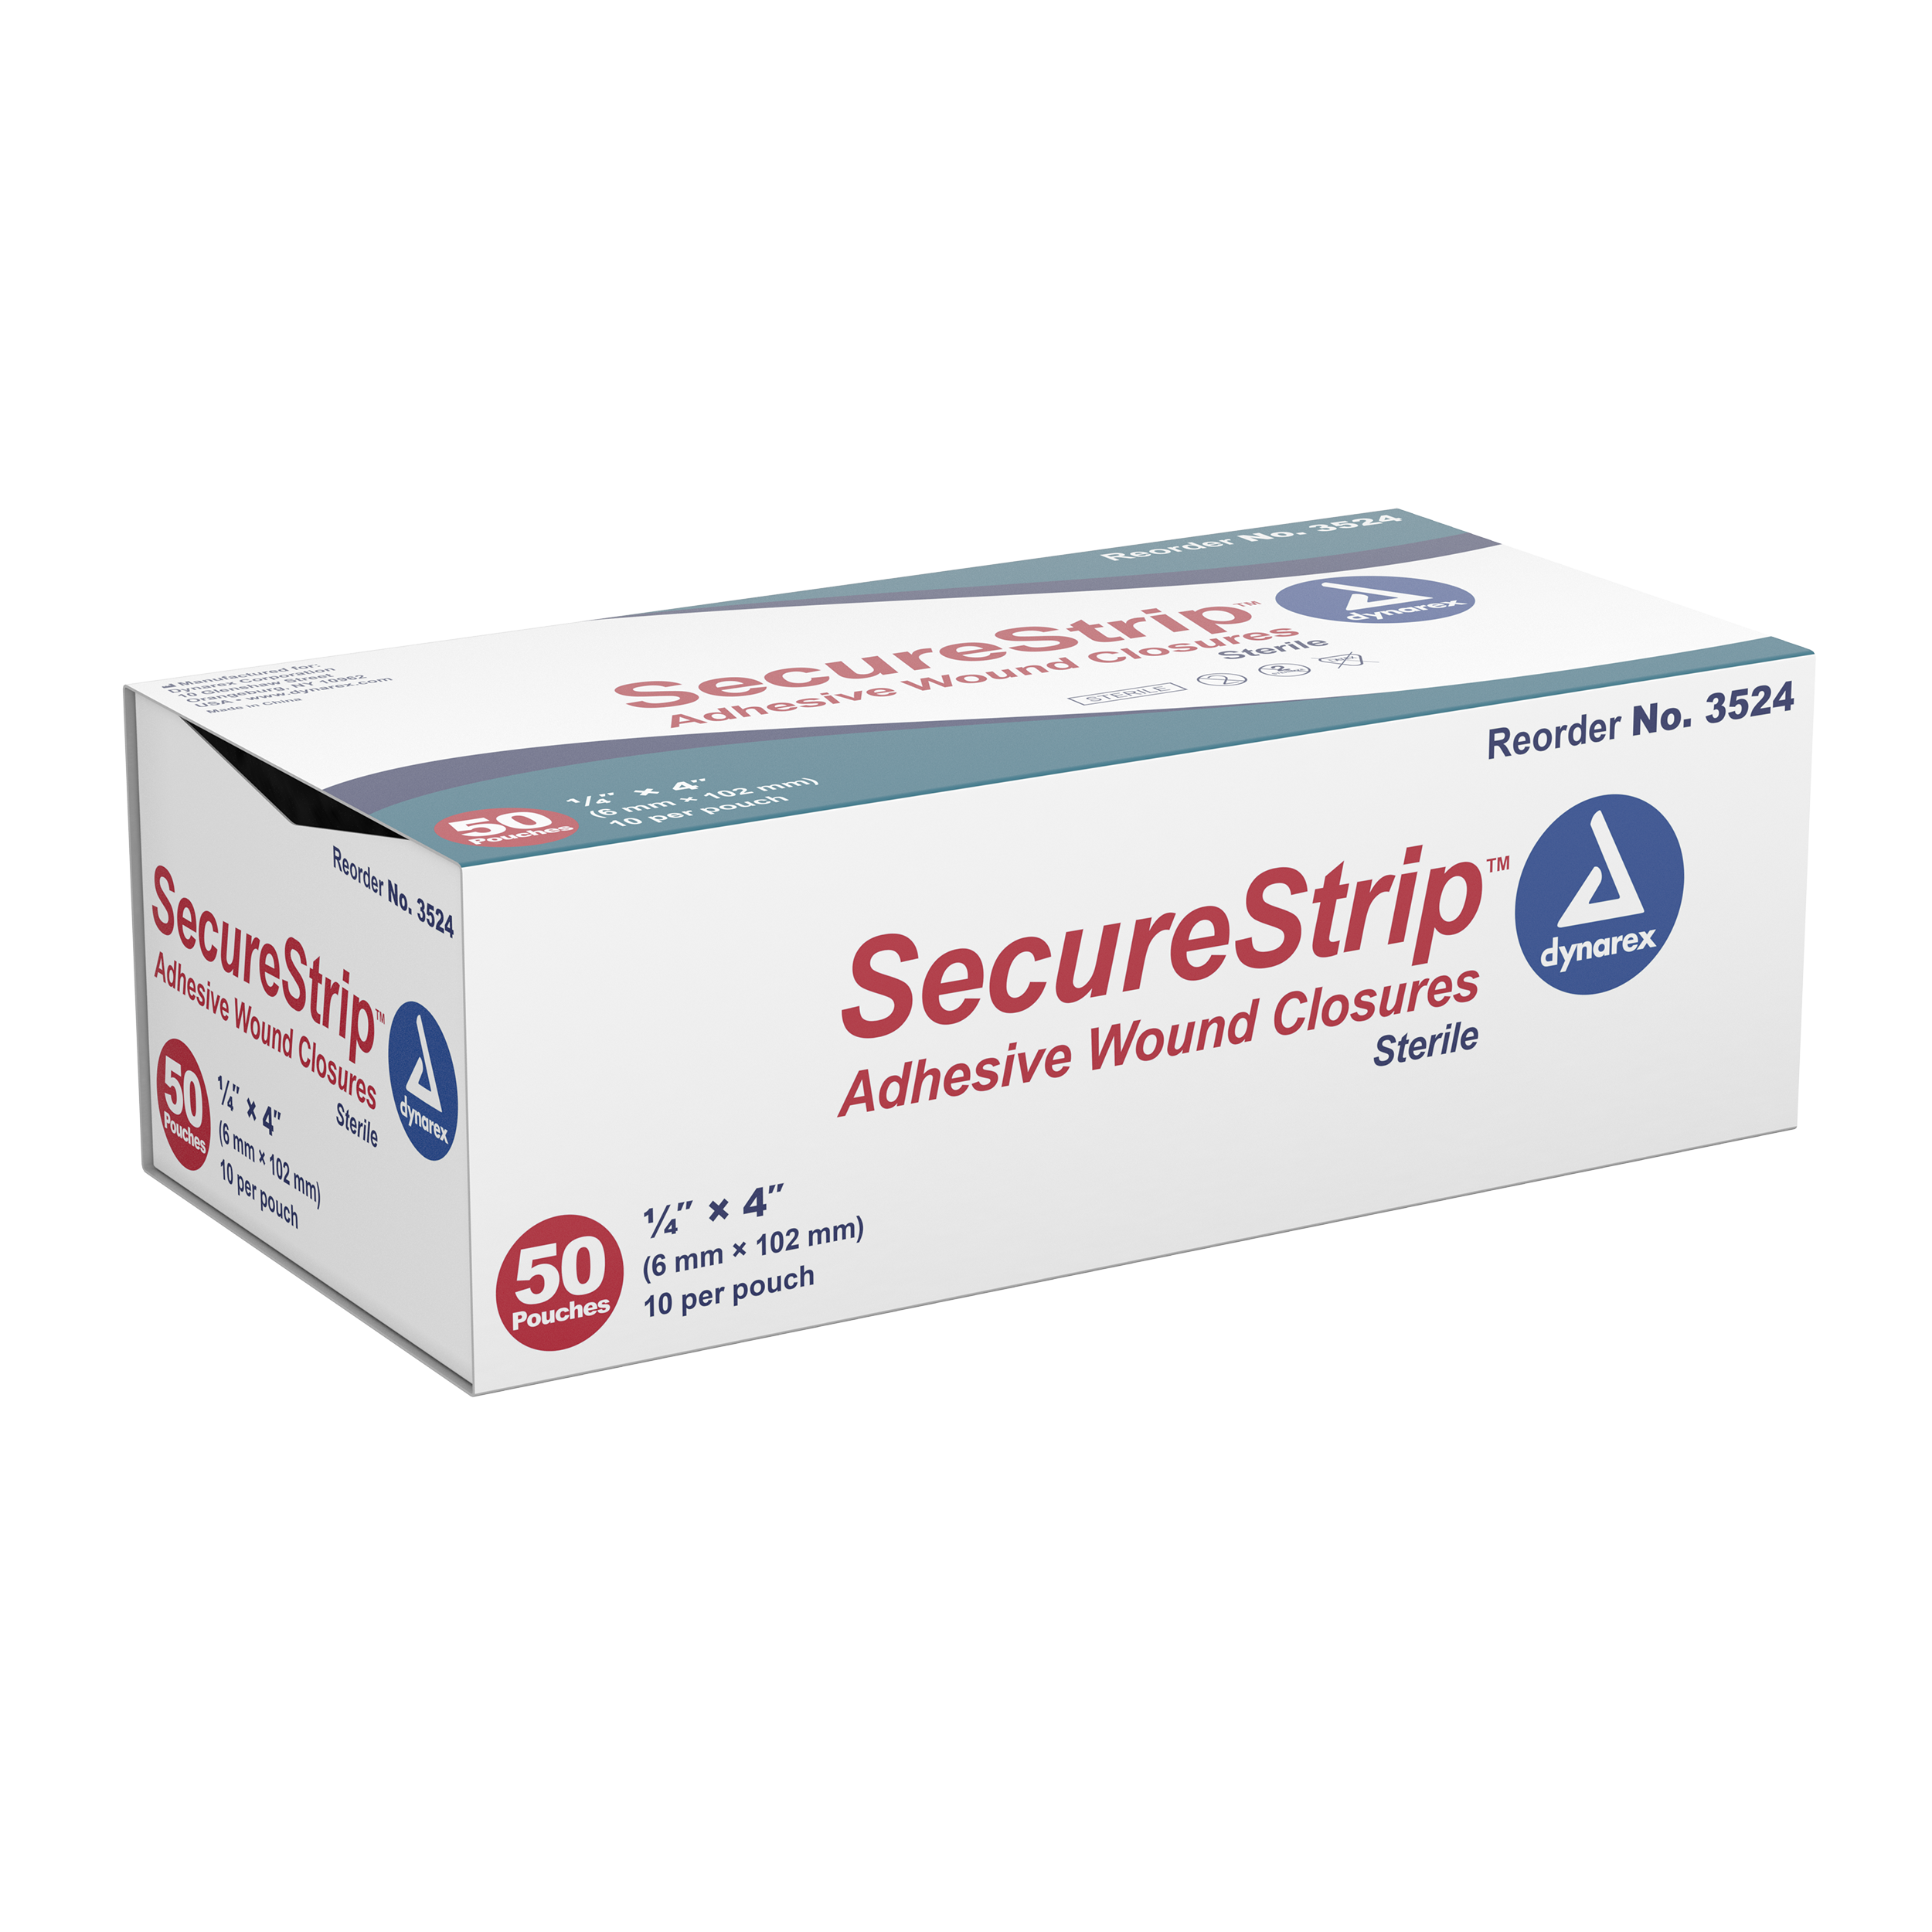 SecureStrip Adhesive Wound Closures - 1/4in x 4in Sterile